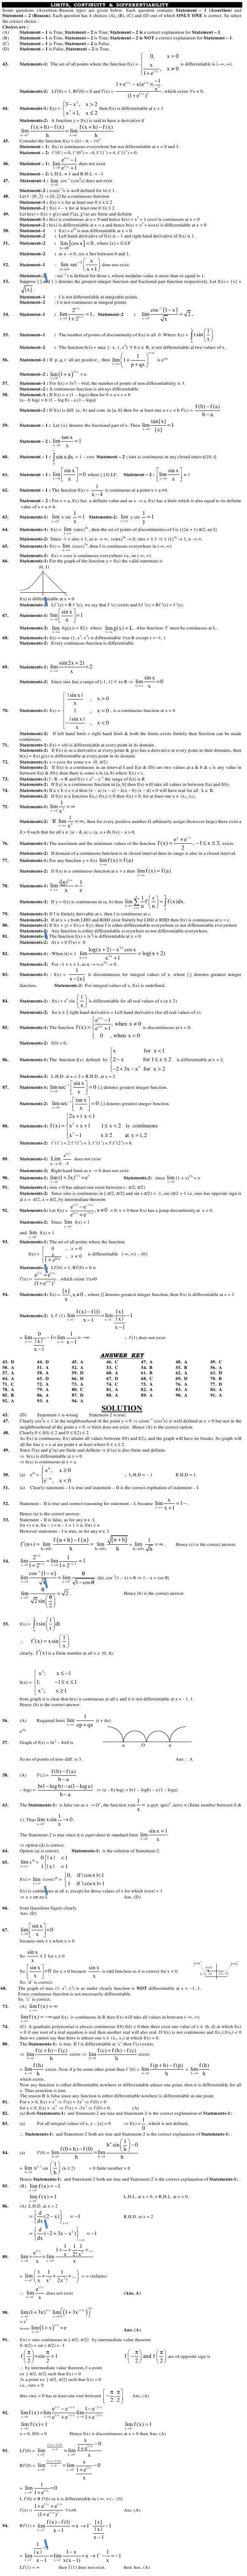 Maths Study Material - Chapter 11